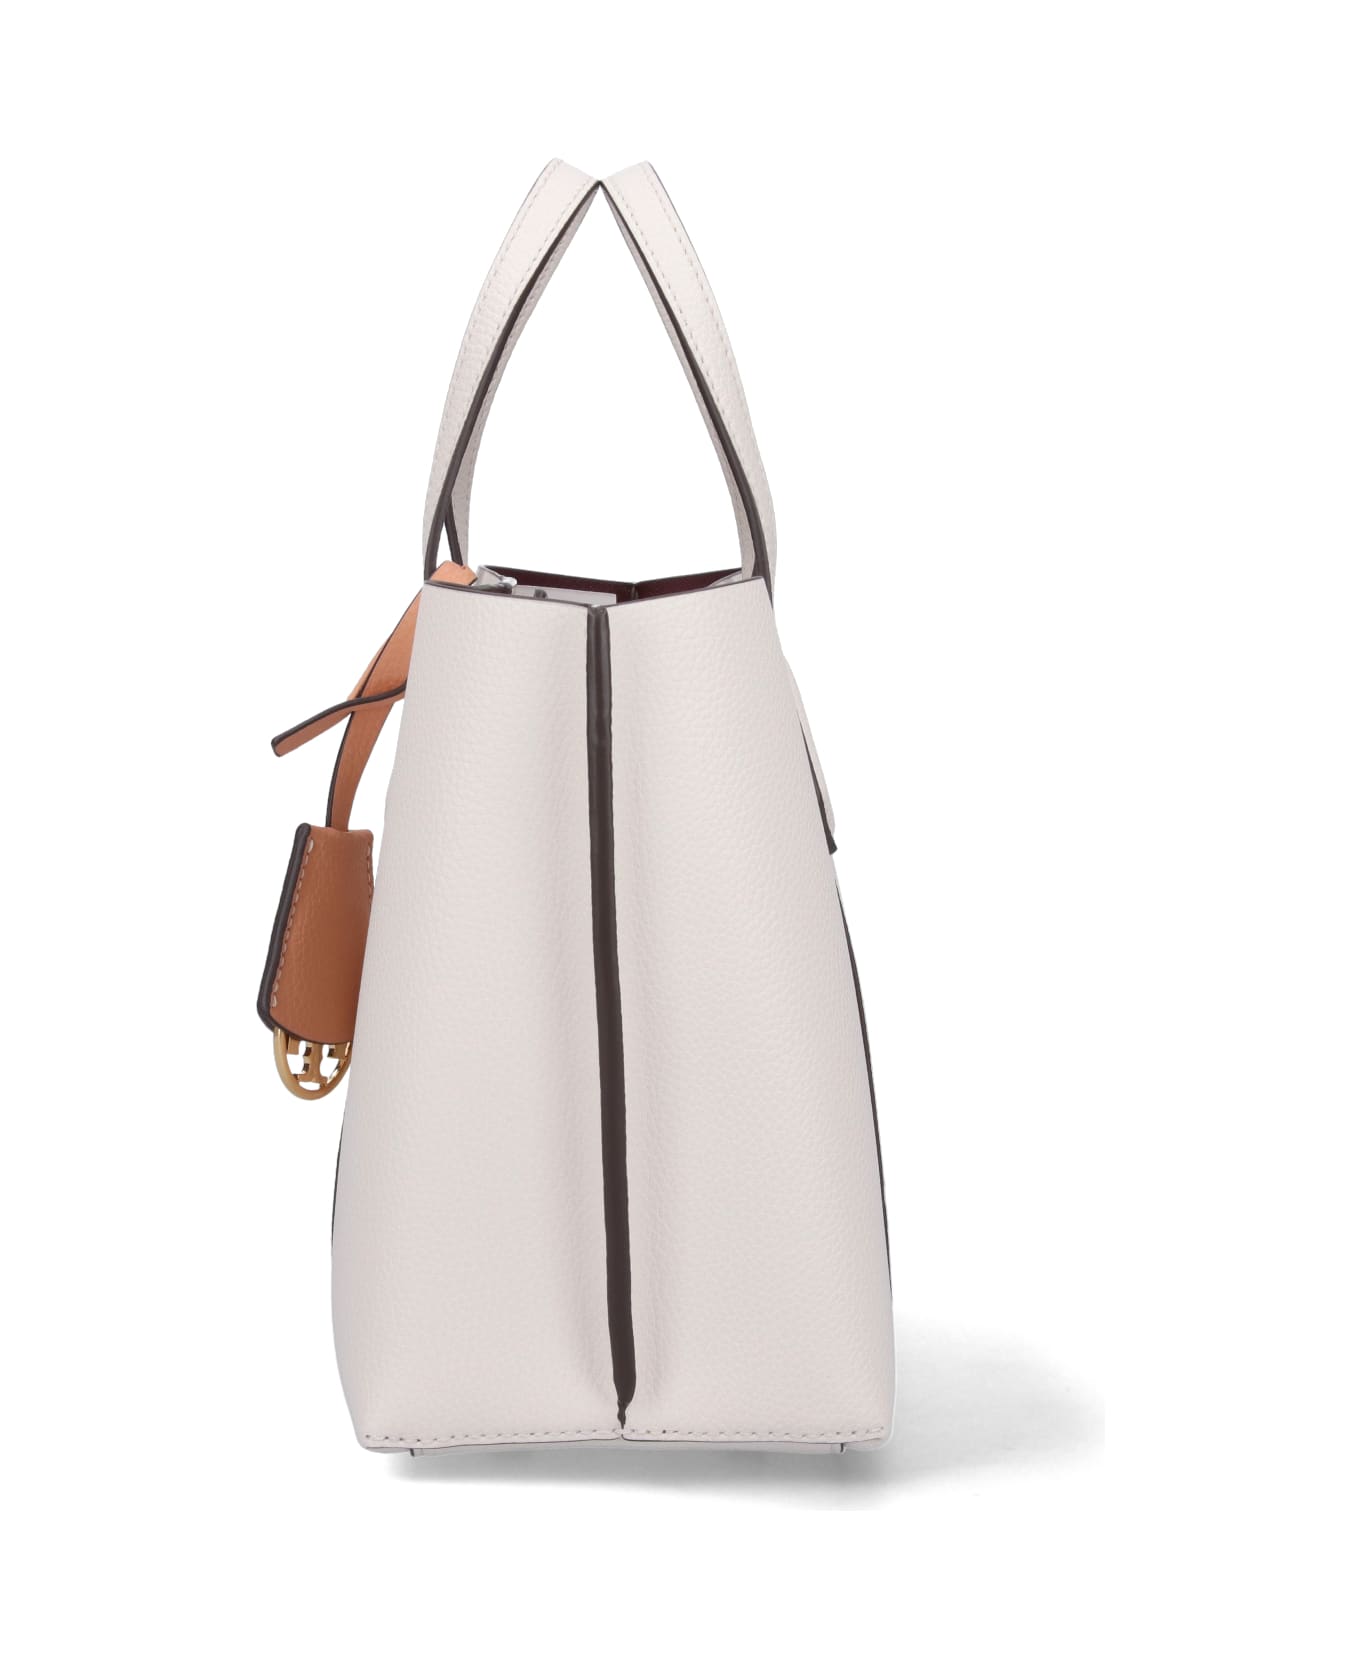 Tory Burch 'perry' Small Tote Bag - White